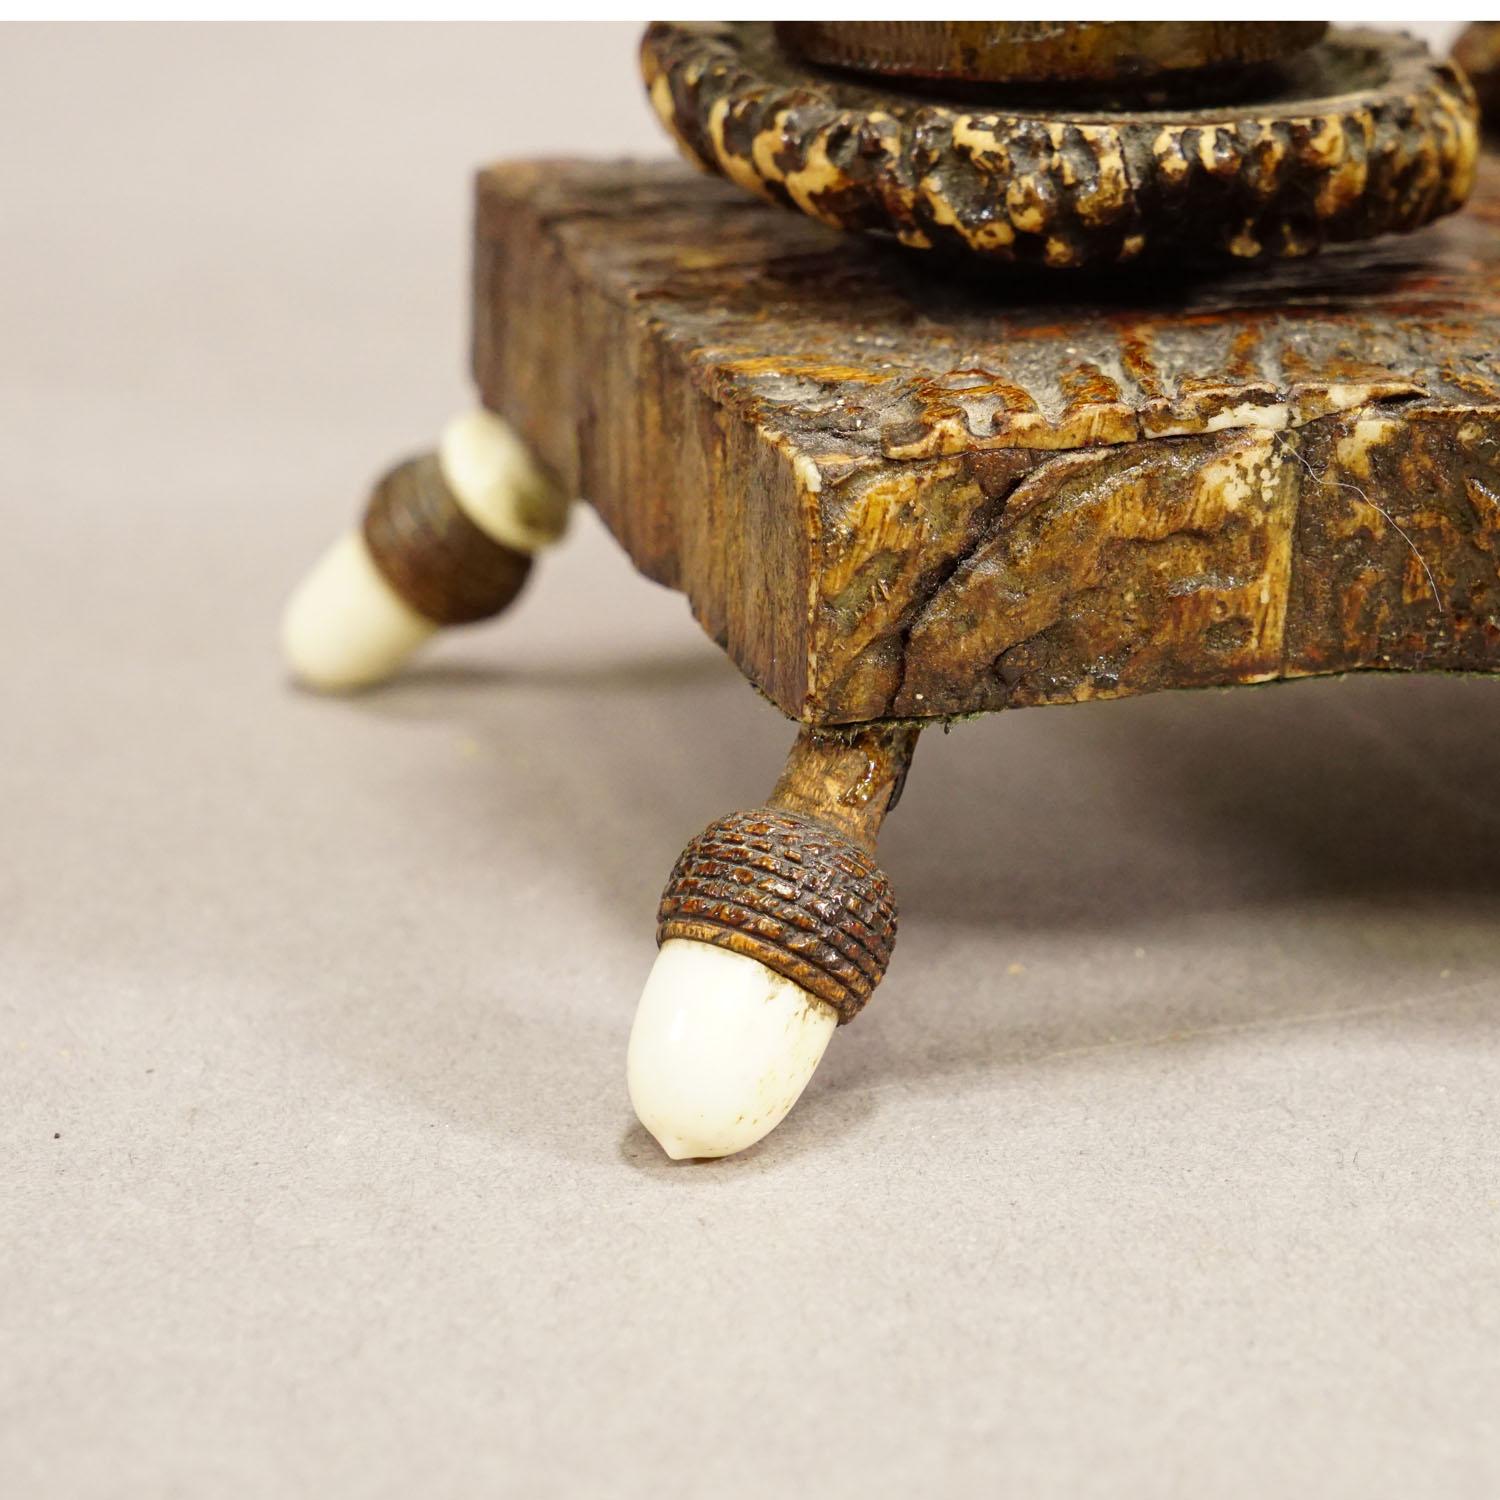 Rare Antler Desk Standish with Elaborate Carvings, Germany ca. 1840 For Sale 3